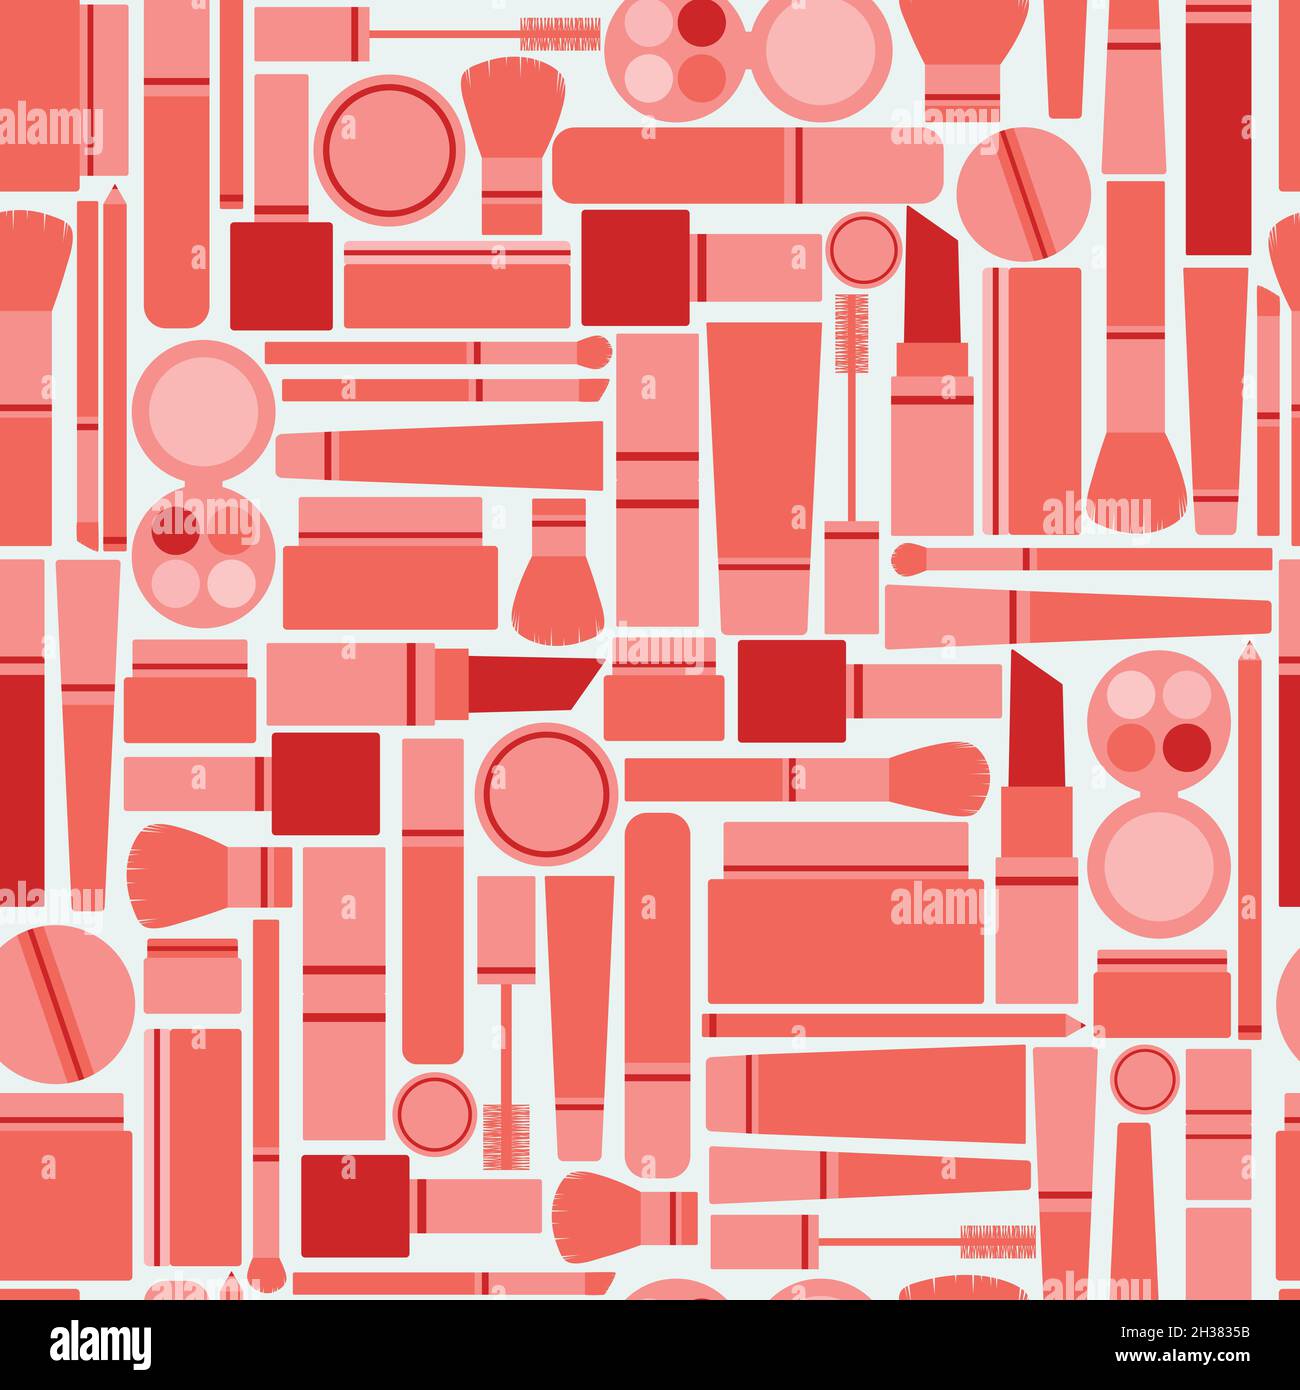 Vector seamless pattern full of makeup items. Makeup with lipstick, mascara, shadows, pencils and brushes in pink and red colors Stock Vector